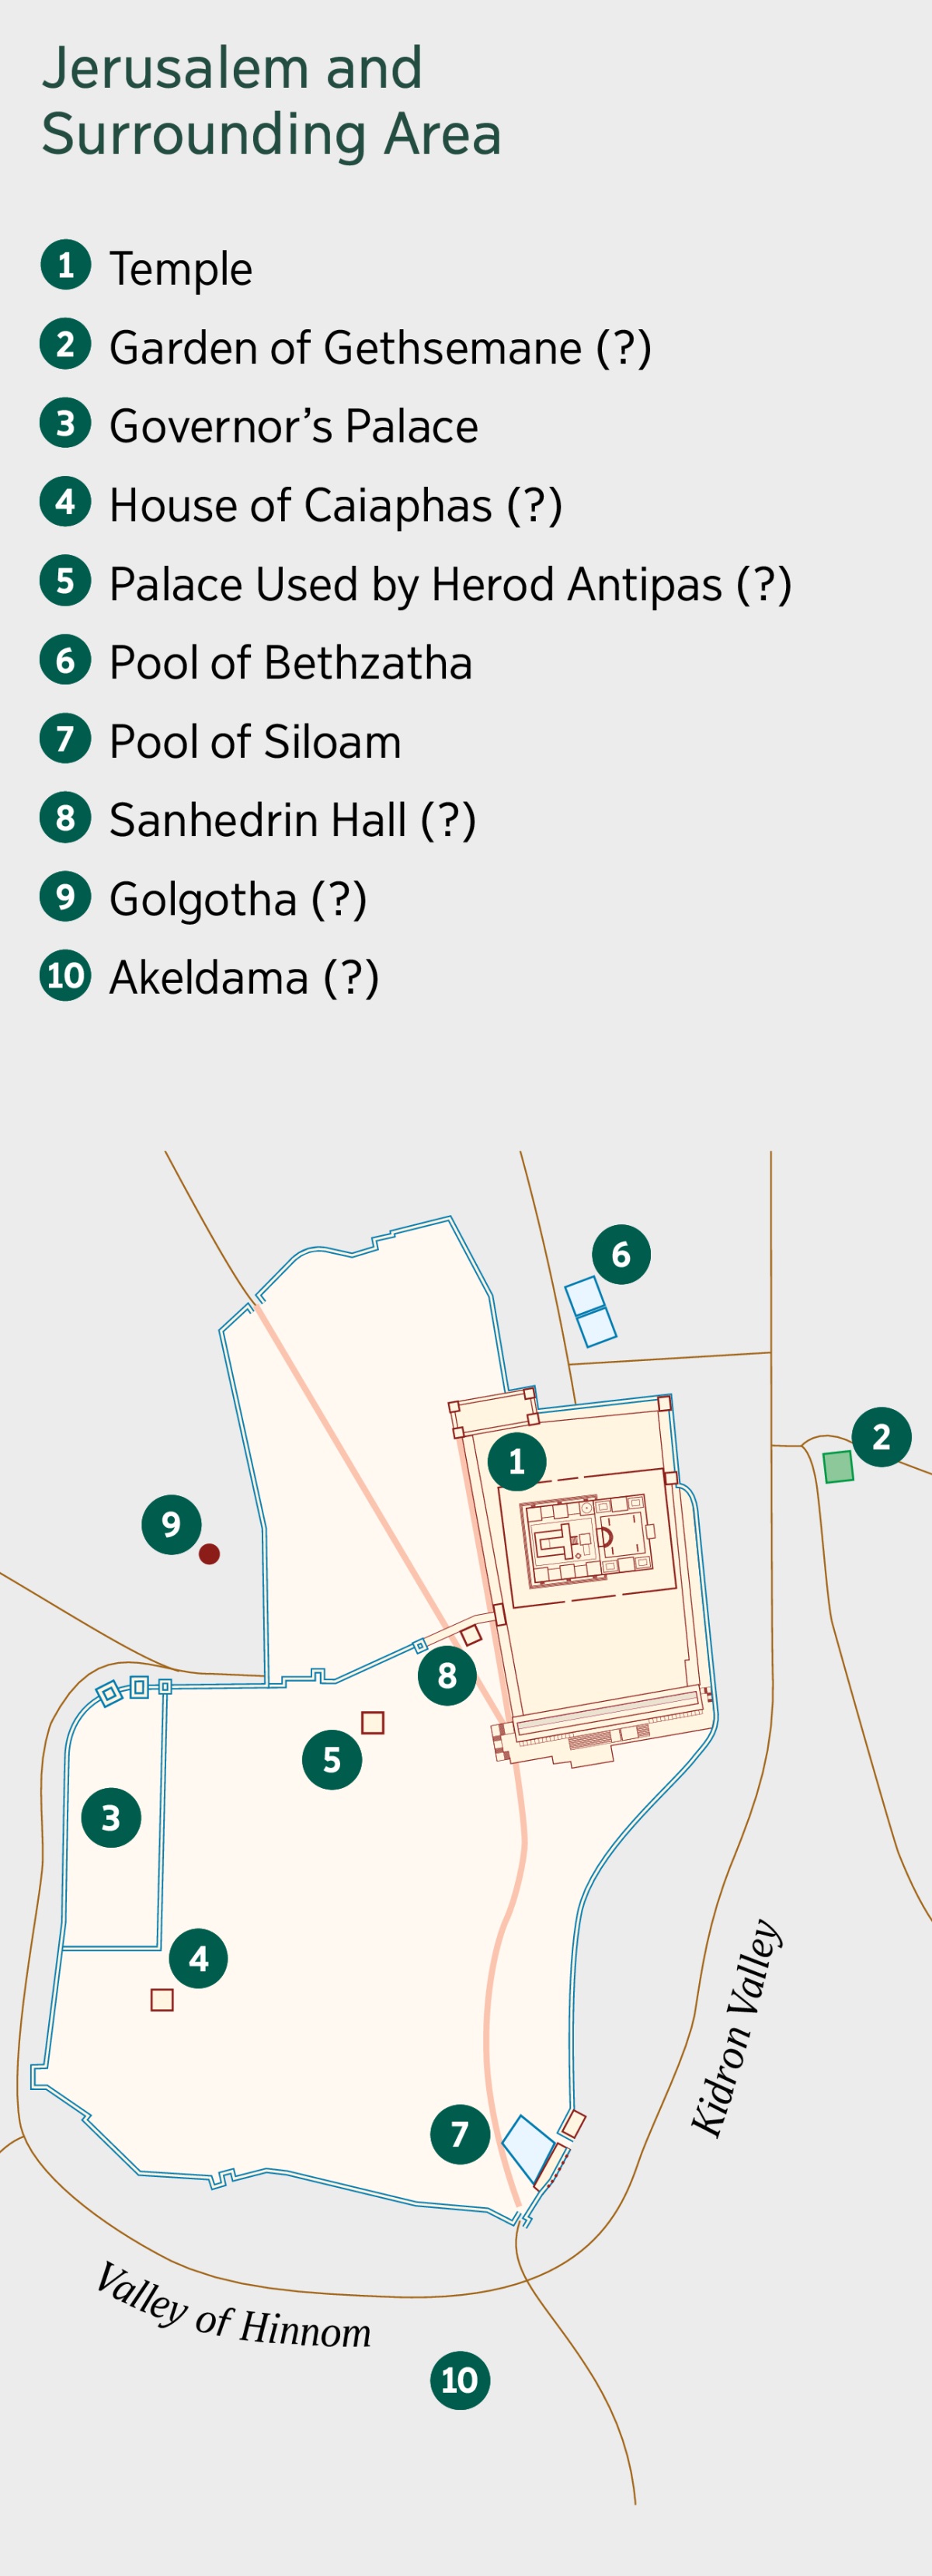 A map showing Jerusalem and the surrounding area. Known and possible locations are listed. 1. Temple. 2. Garden of Gethsemane. 3. Governor’s palace. 4. House of Caiaphas. 5. Palace used by Herod Antipas. 6. Pool of Bethzatha. 7. Pool of Siloam. 8. Sanhedrin Hall. 9. Golgotha. 10. Akeldama.